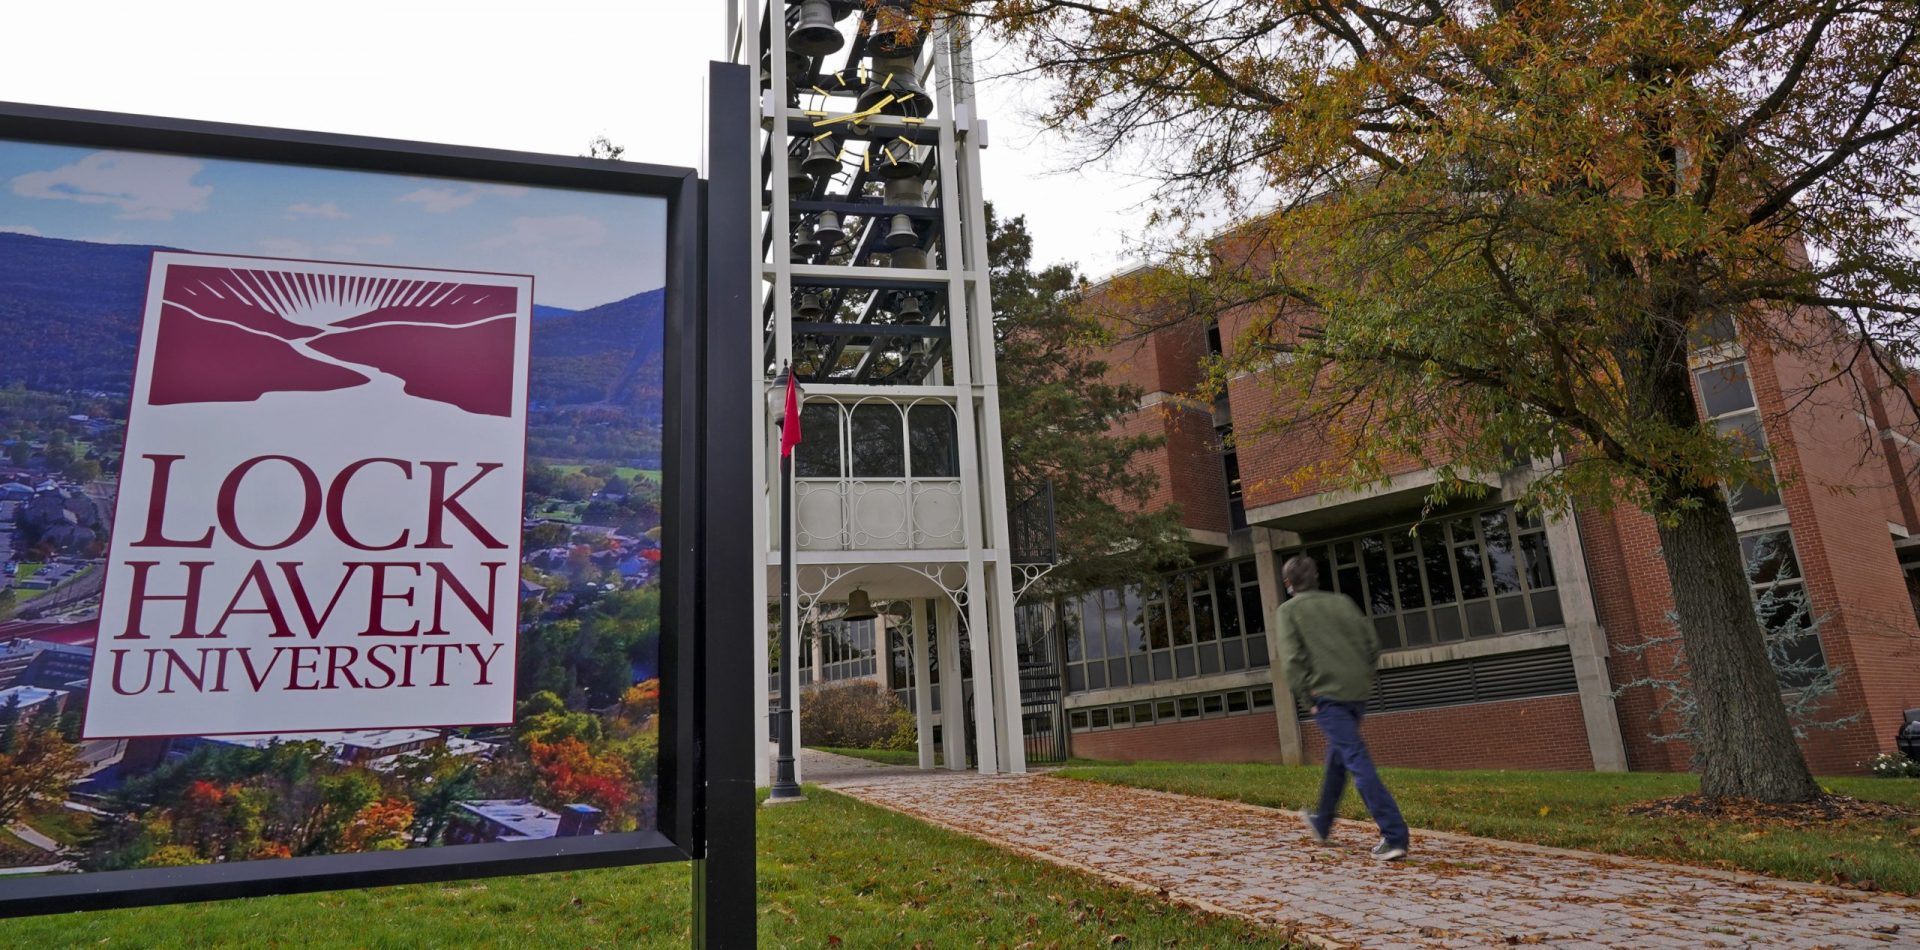 A student walks on the Lock Haven University campus in Lock Haven, Pa, Saturday, Oct. 31, 2020.